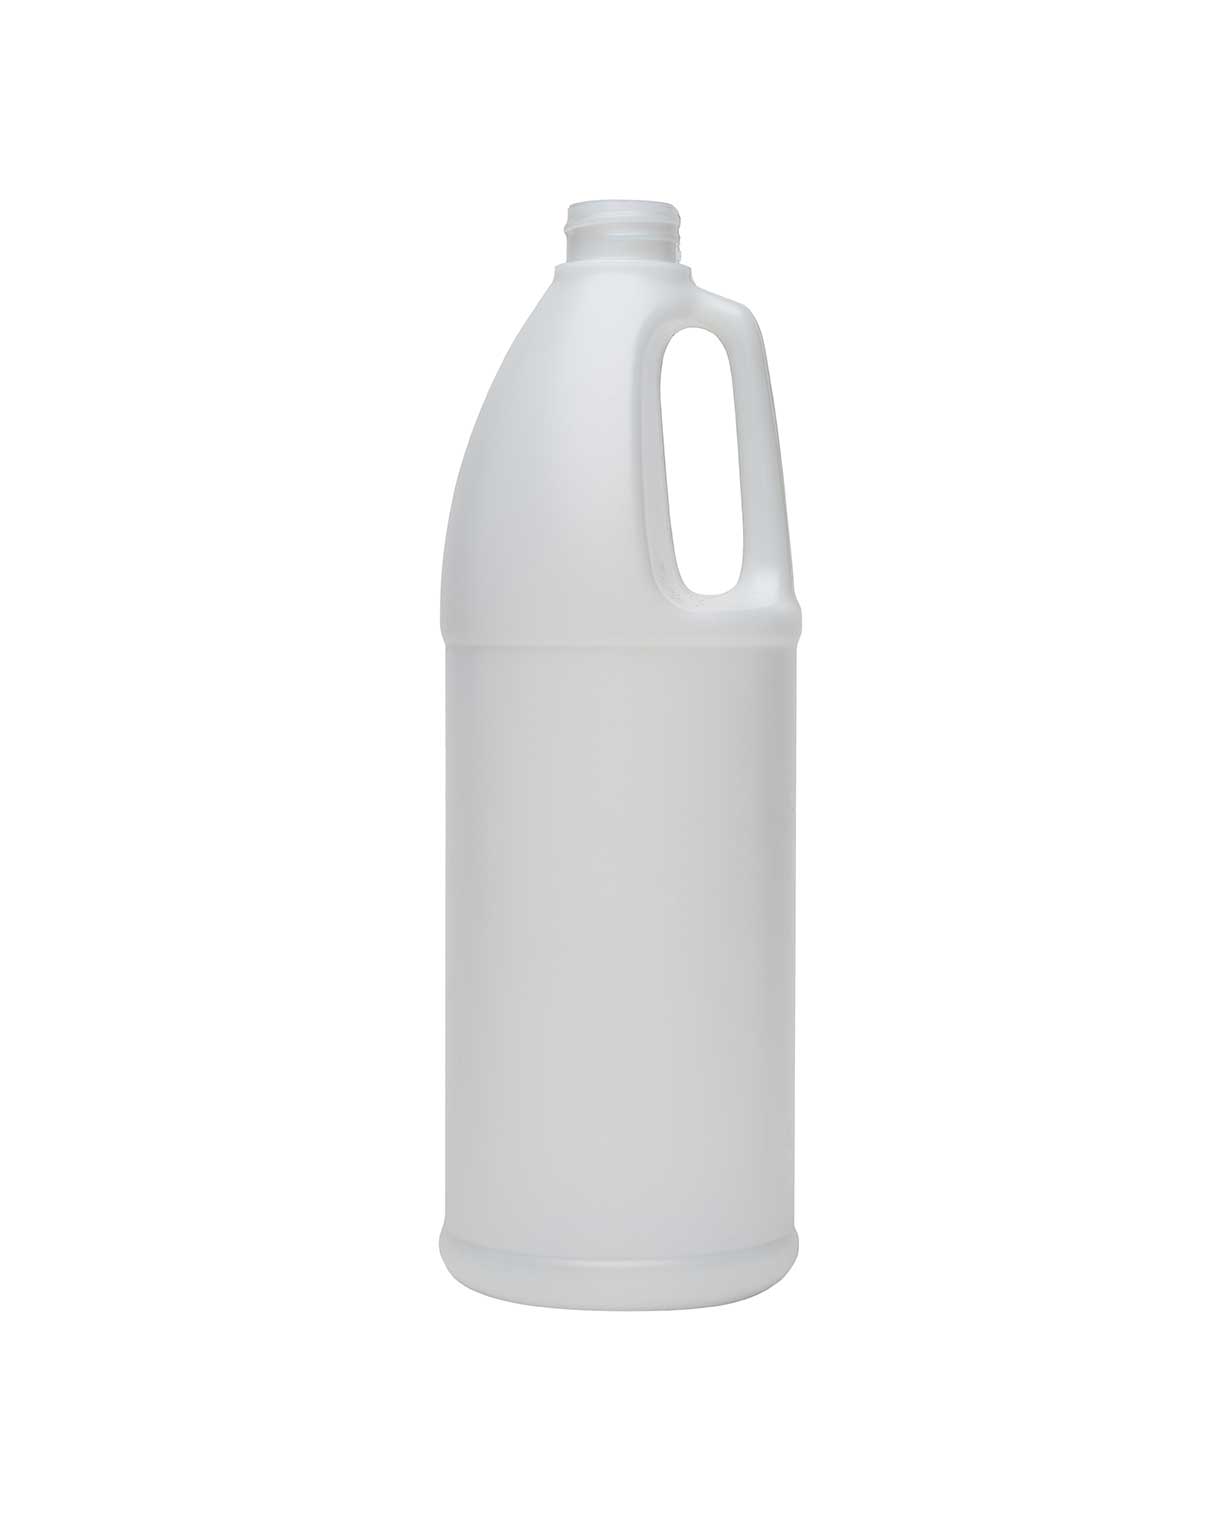 1 Gallon (128oz) Natural HDPE Plastic Industrial Round Bottle (38-400)